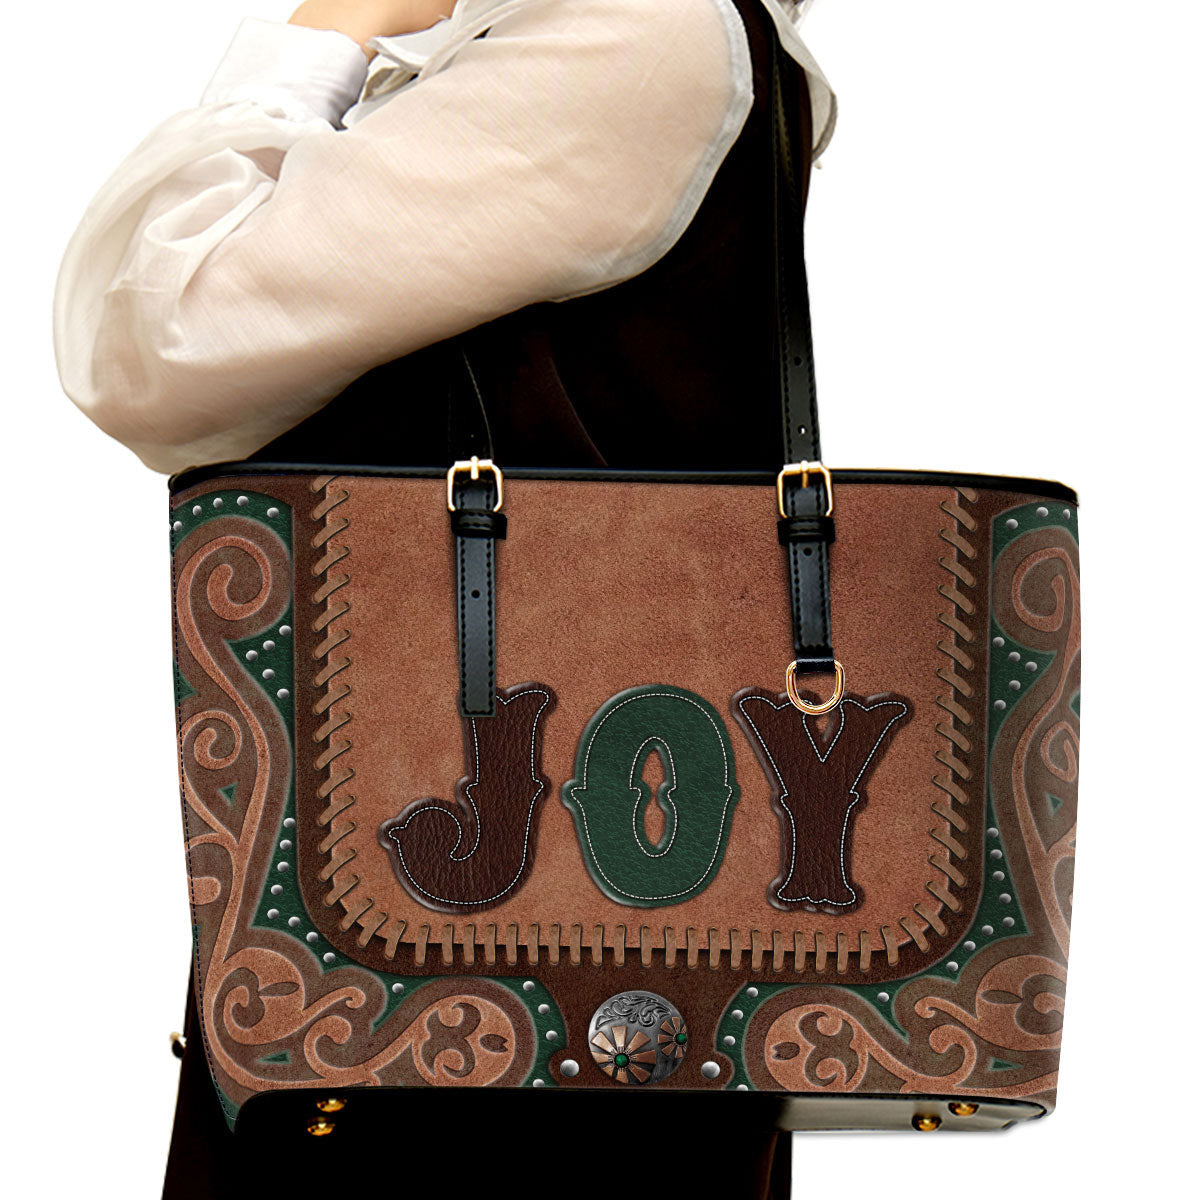 Joy Large Leather Tote Bag - Christ Gifts For Religious Women - Best Mother's Day Gifts